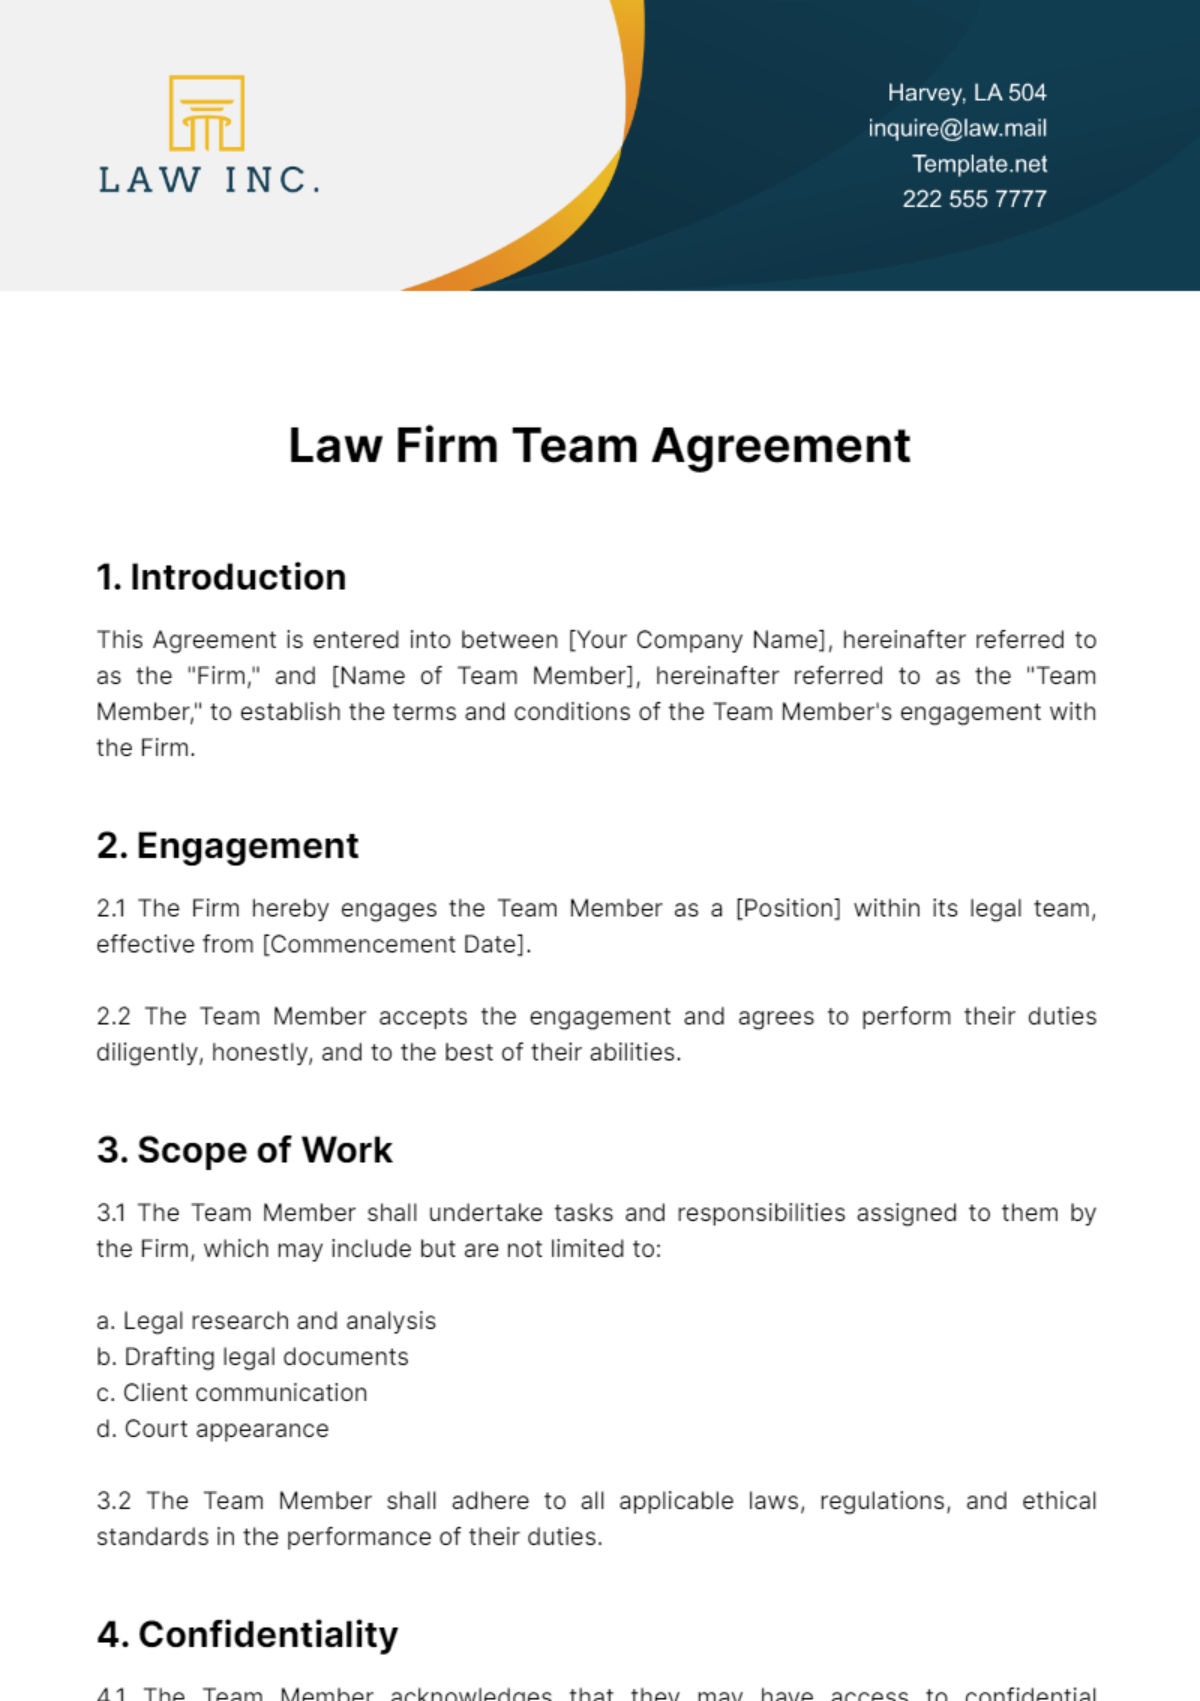 Law Firm Team Agreement Template